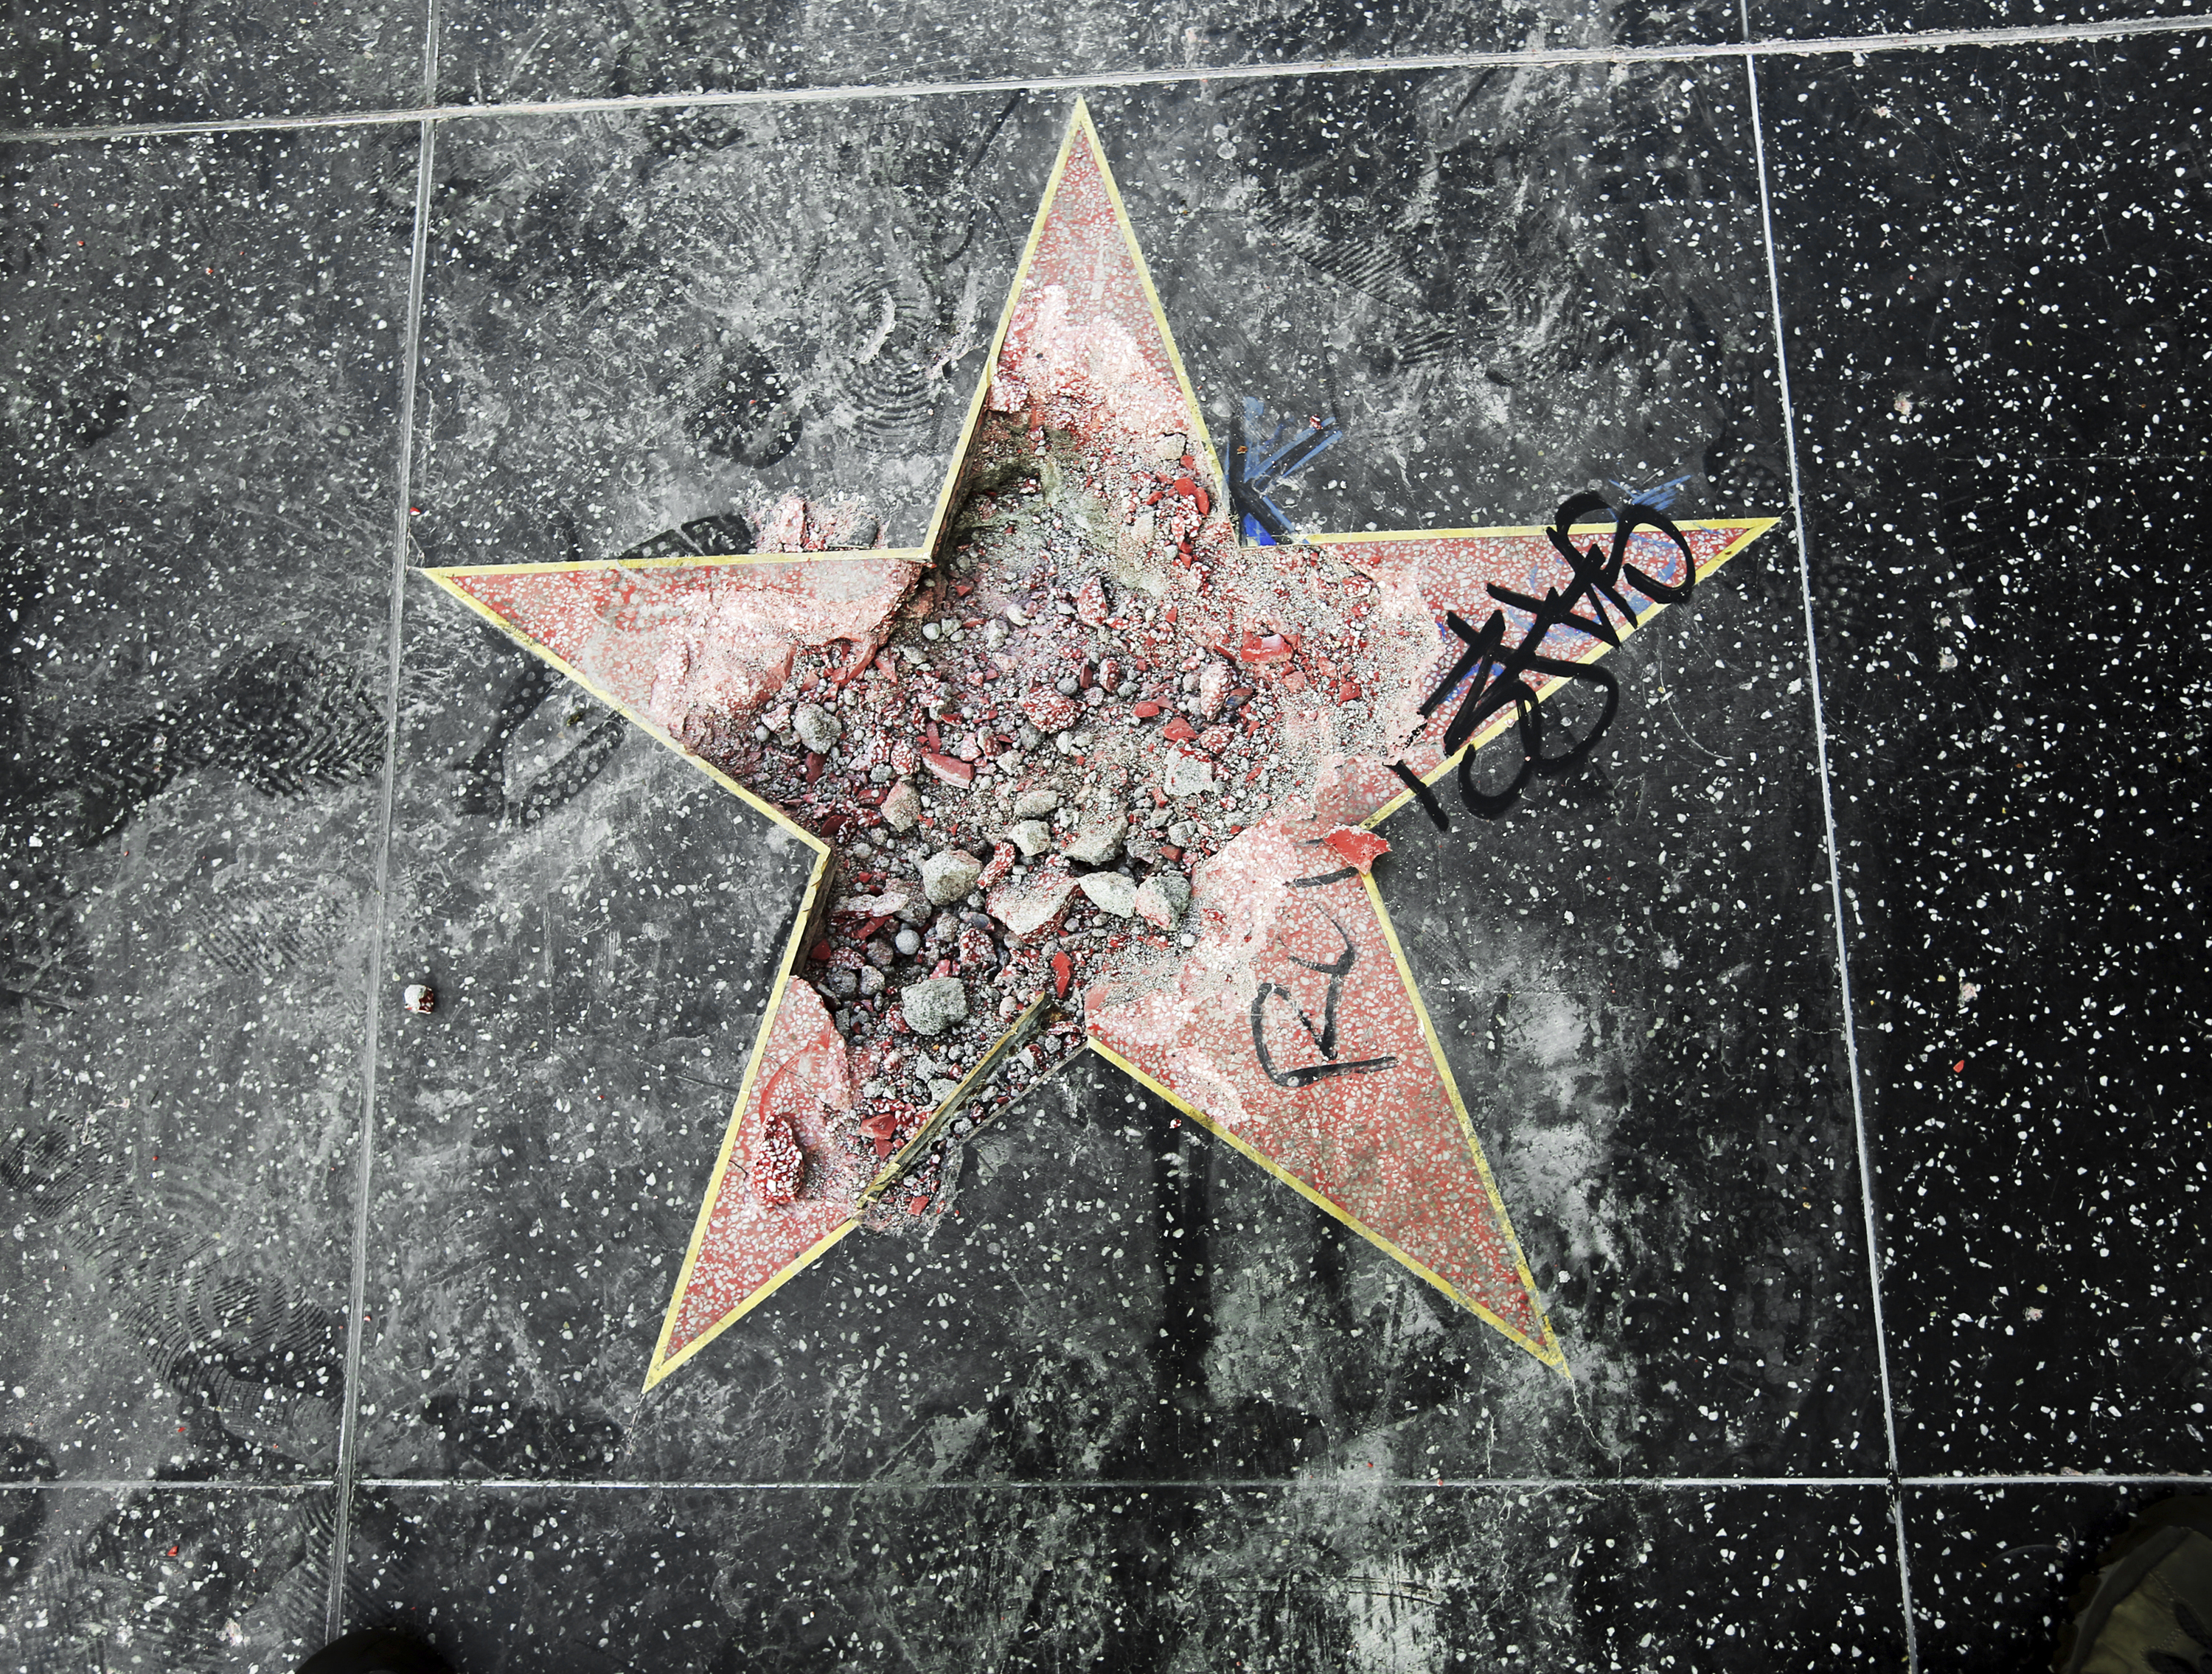 Donald Trump's star on the Hollywood Walk of Fame after it was vandalised in Los Angeles 